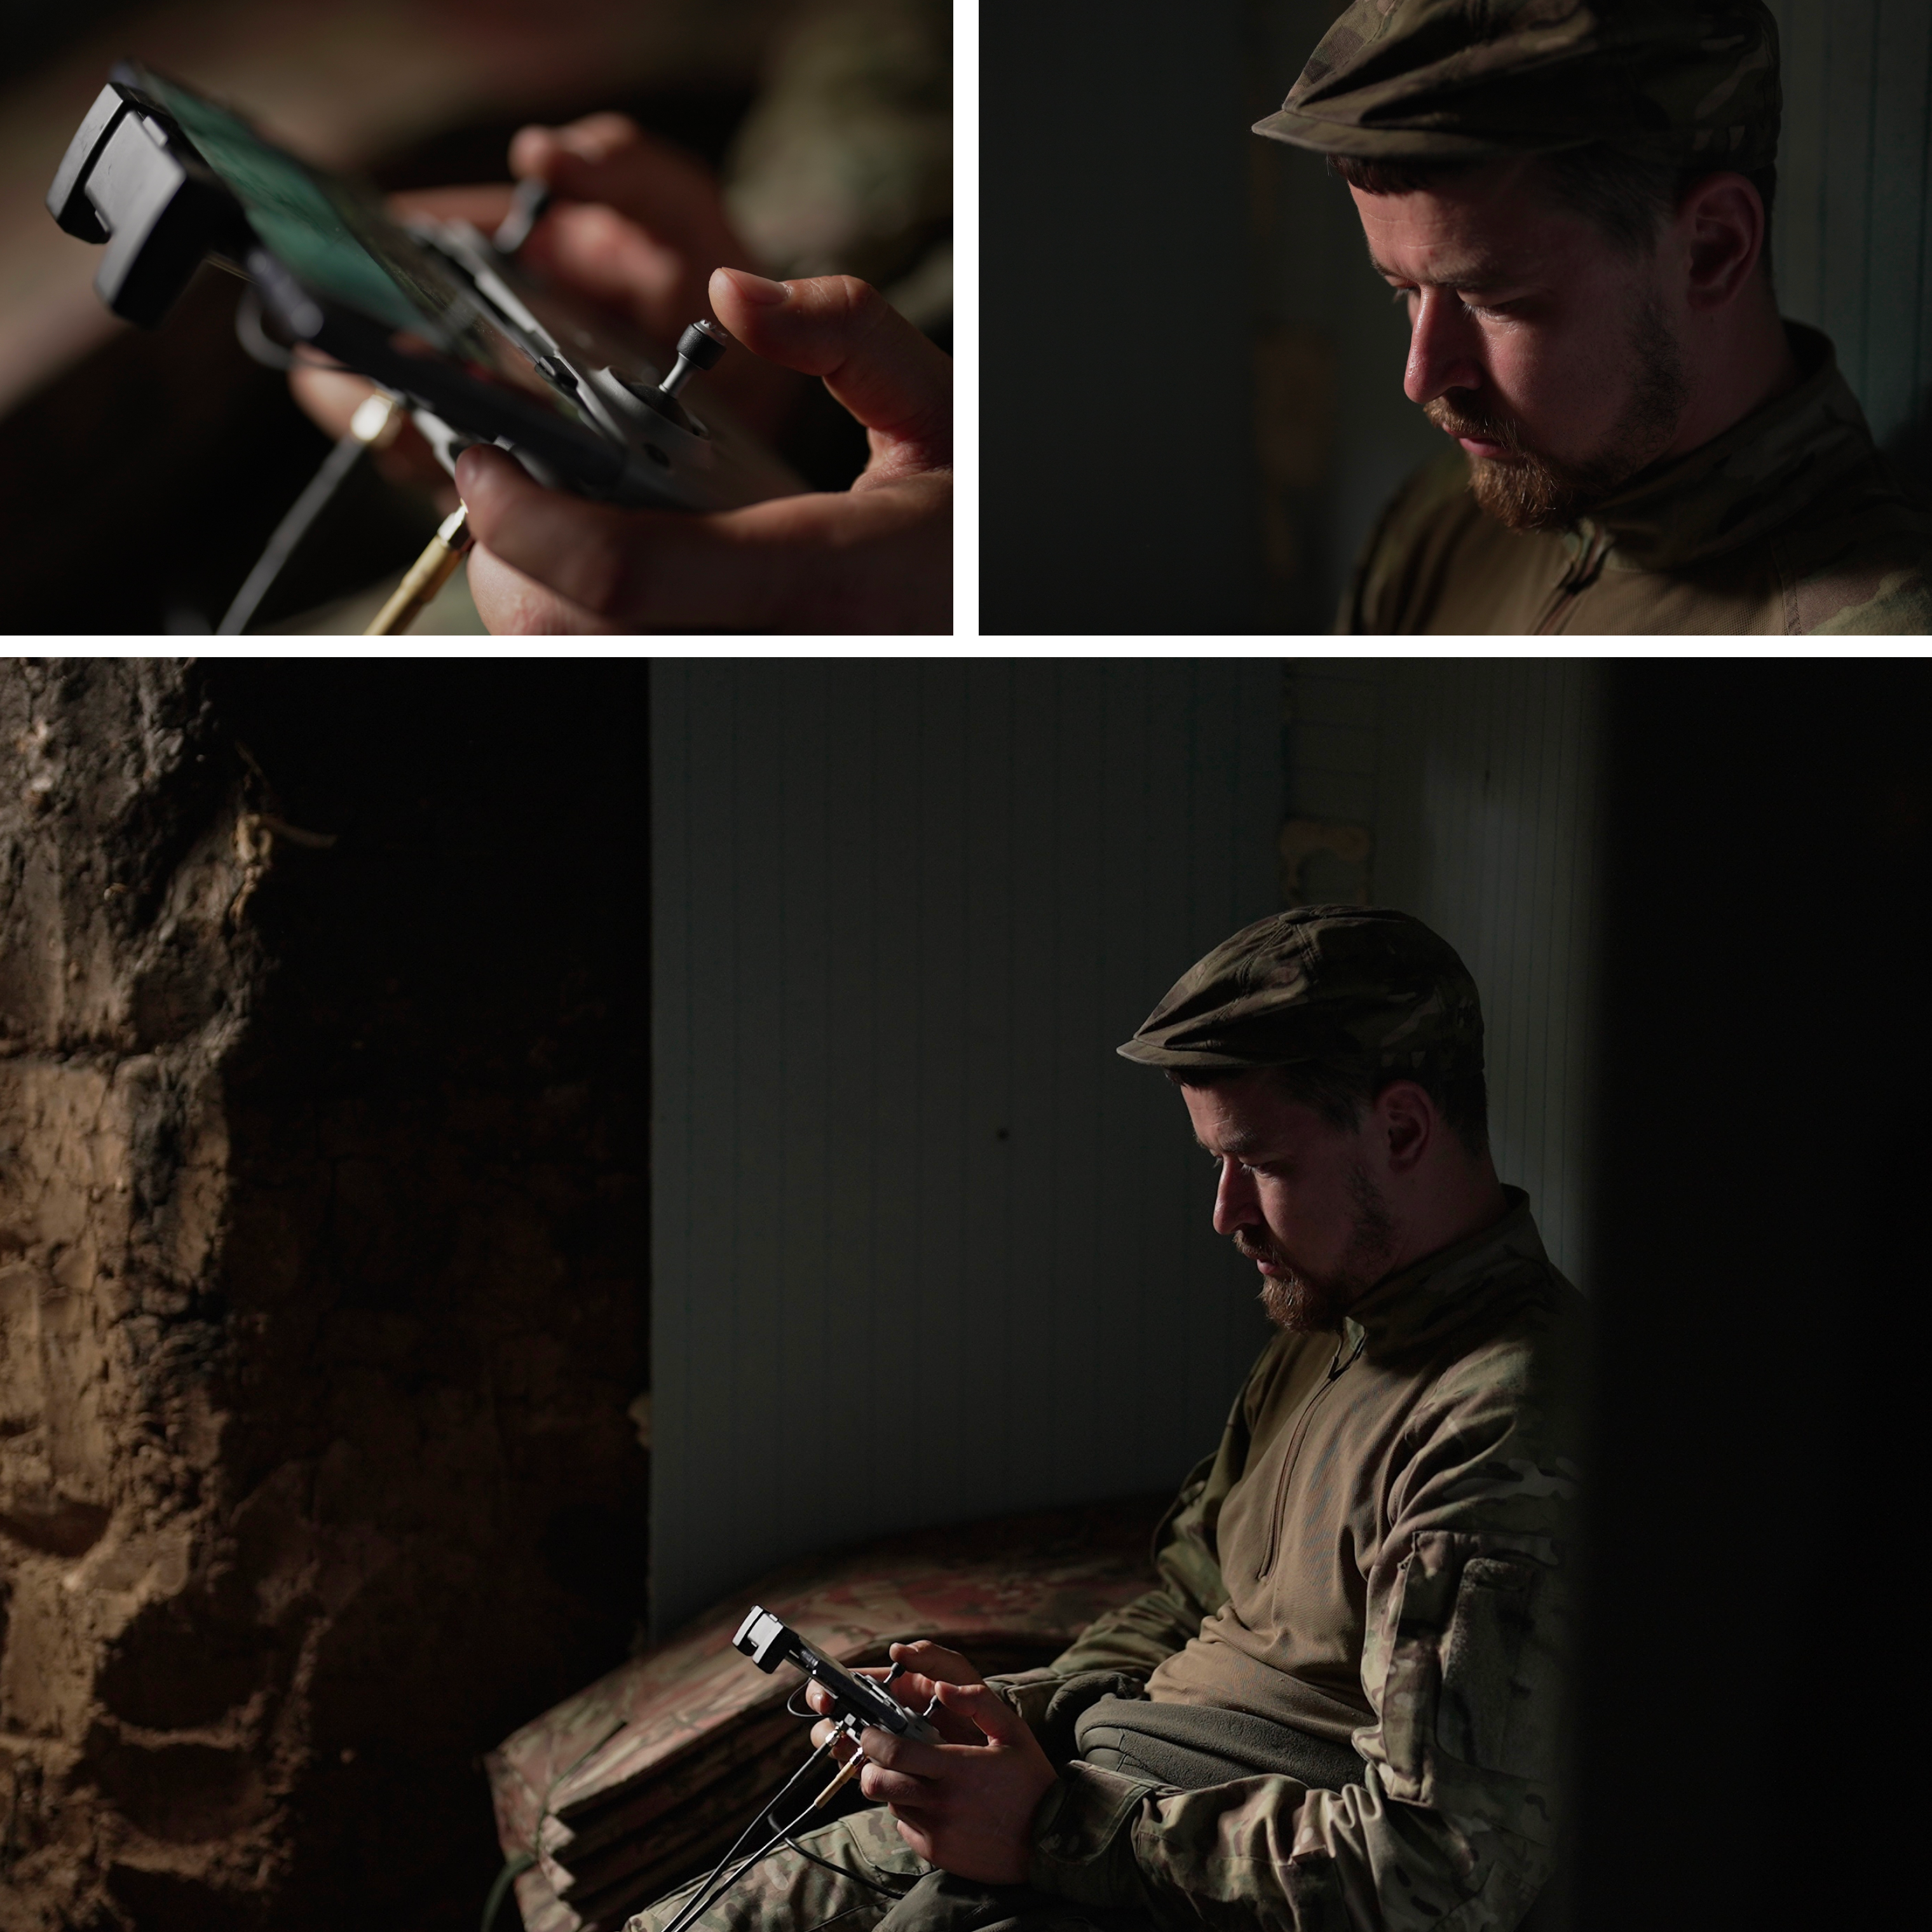 A grid of photos showing a man holding a controller in his hands and looking down